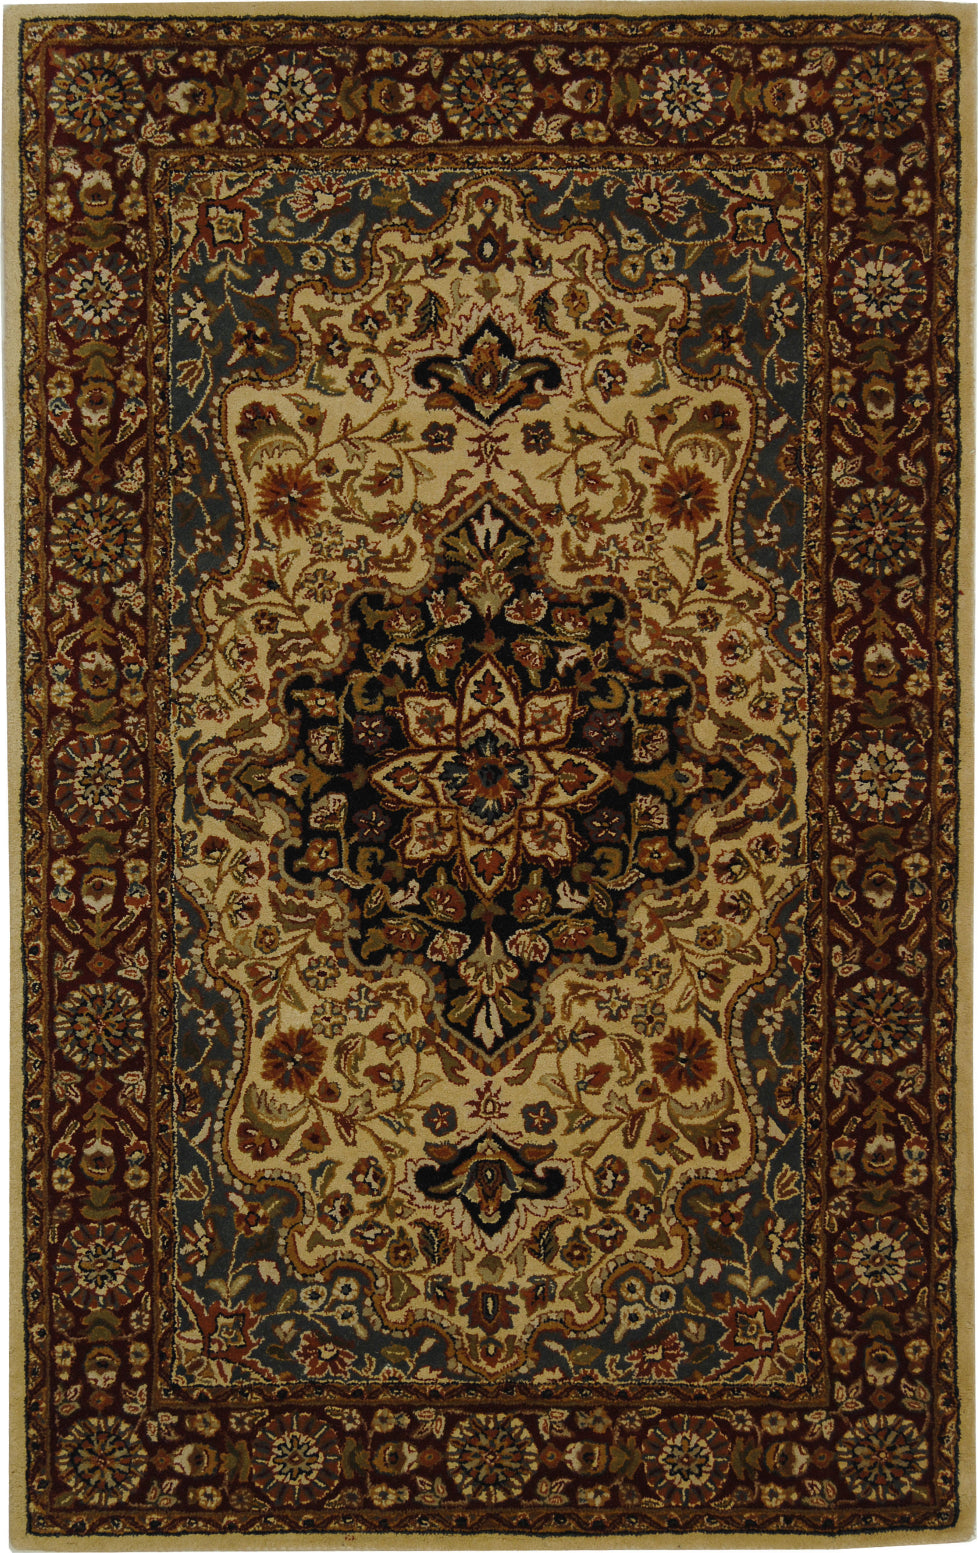 Safavieh Heritage 760 Ivory/Red Area Rug Main Feature